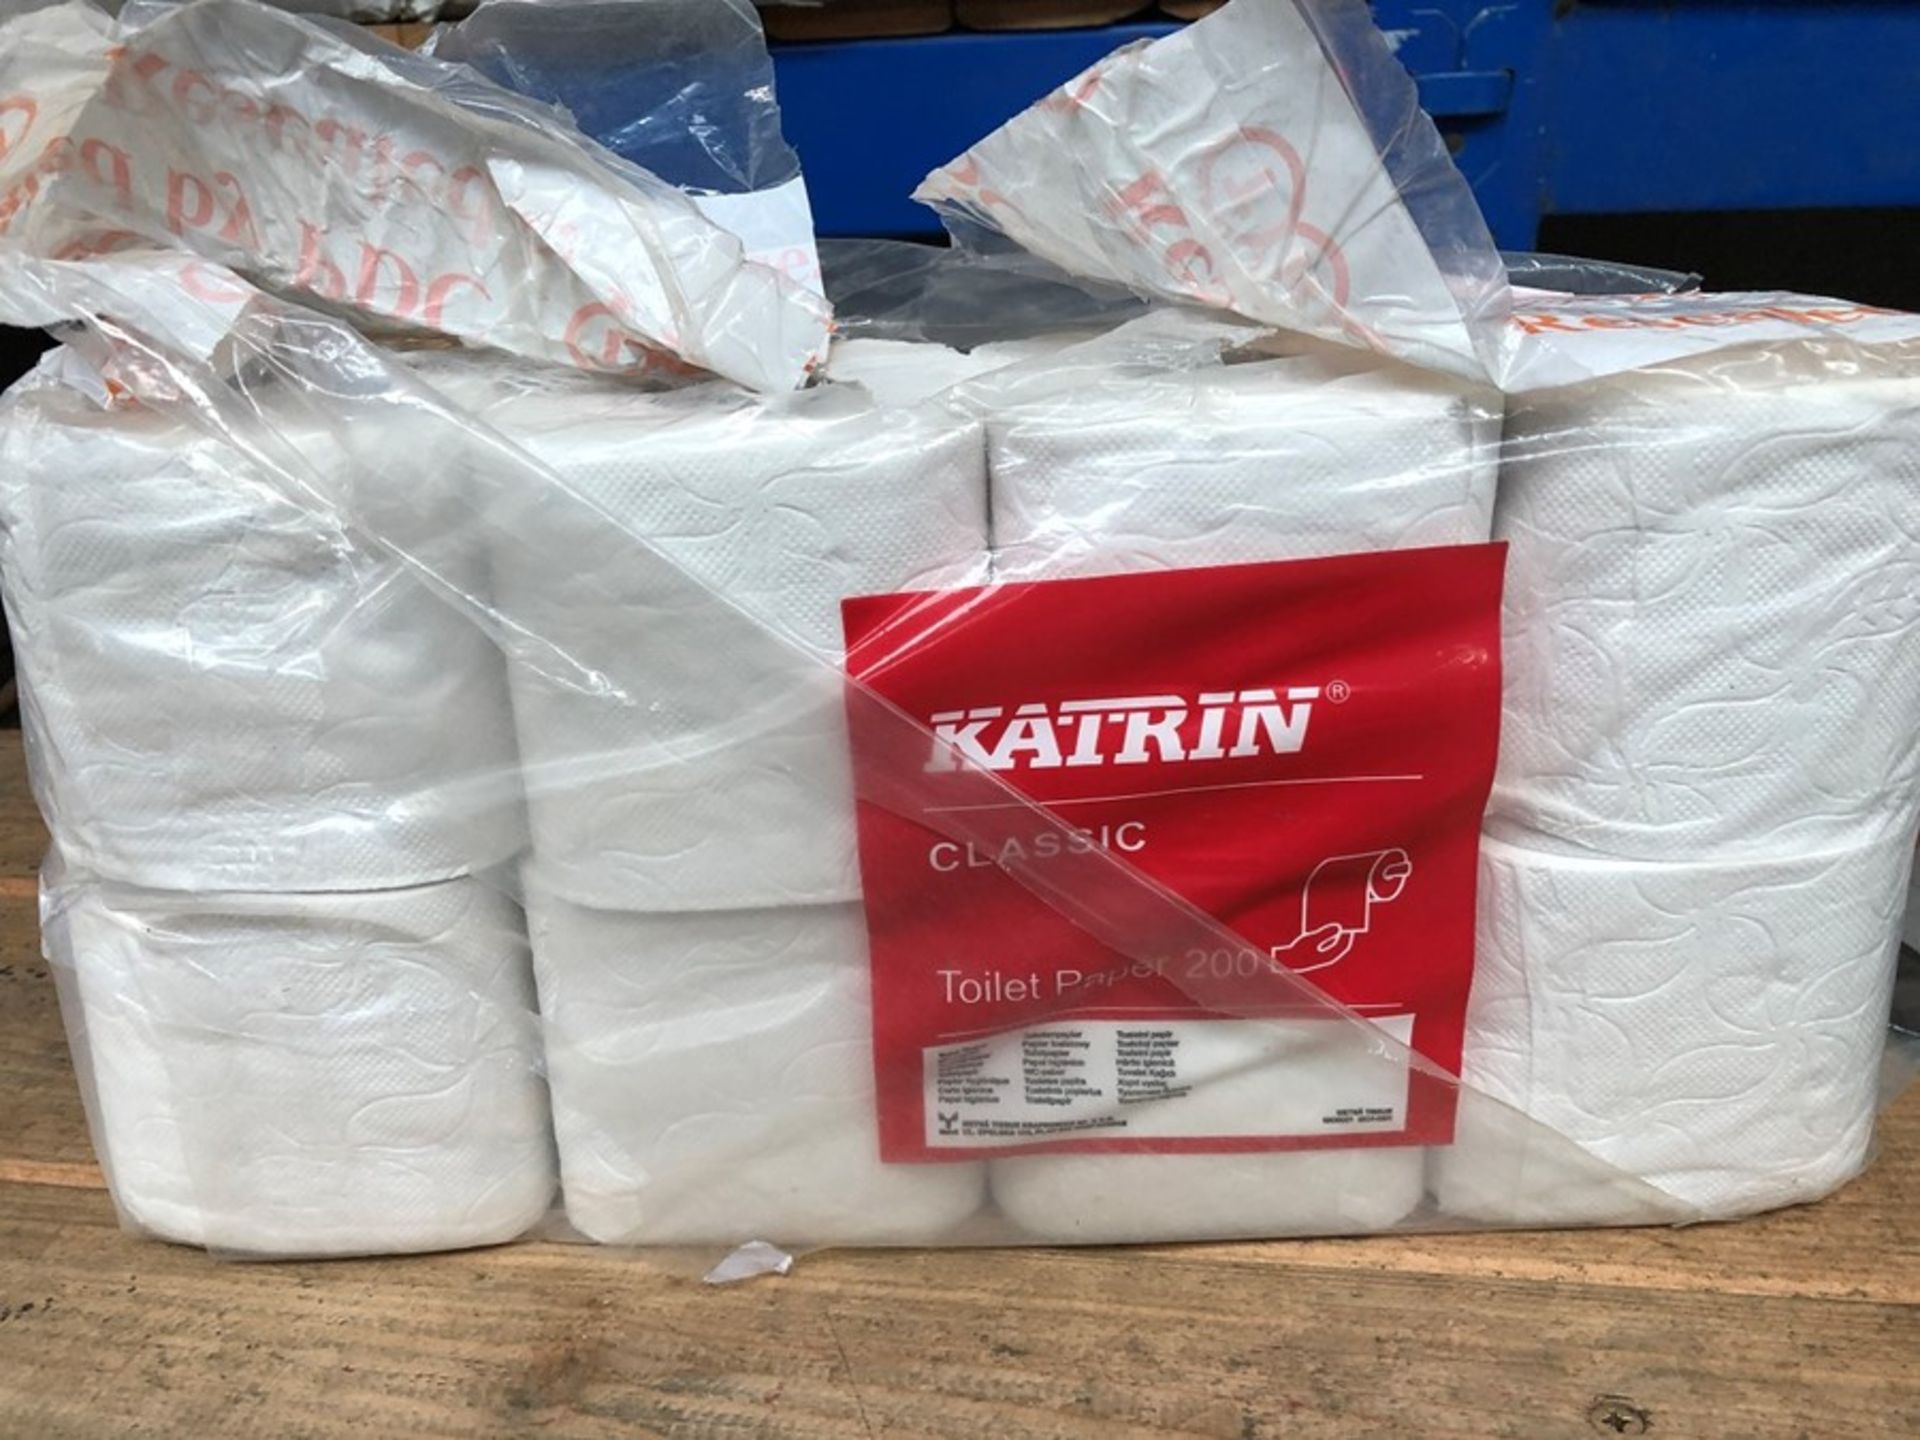 1 LOT TO CONTAIN 6 ROLLS X 200 SHEETS OF KATRIN CLASSIC TOILET ROLL